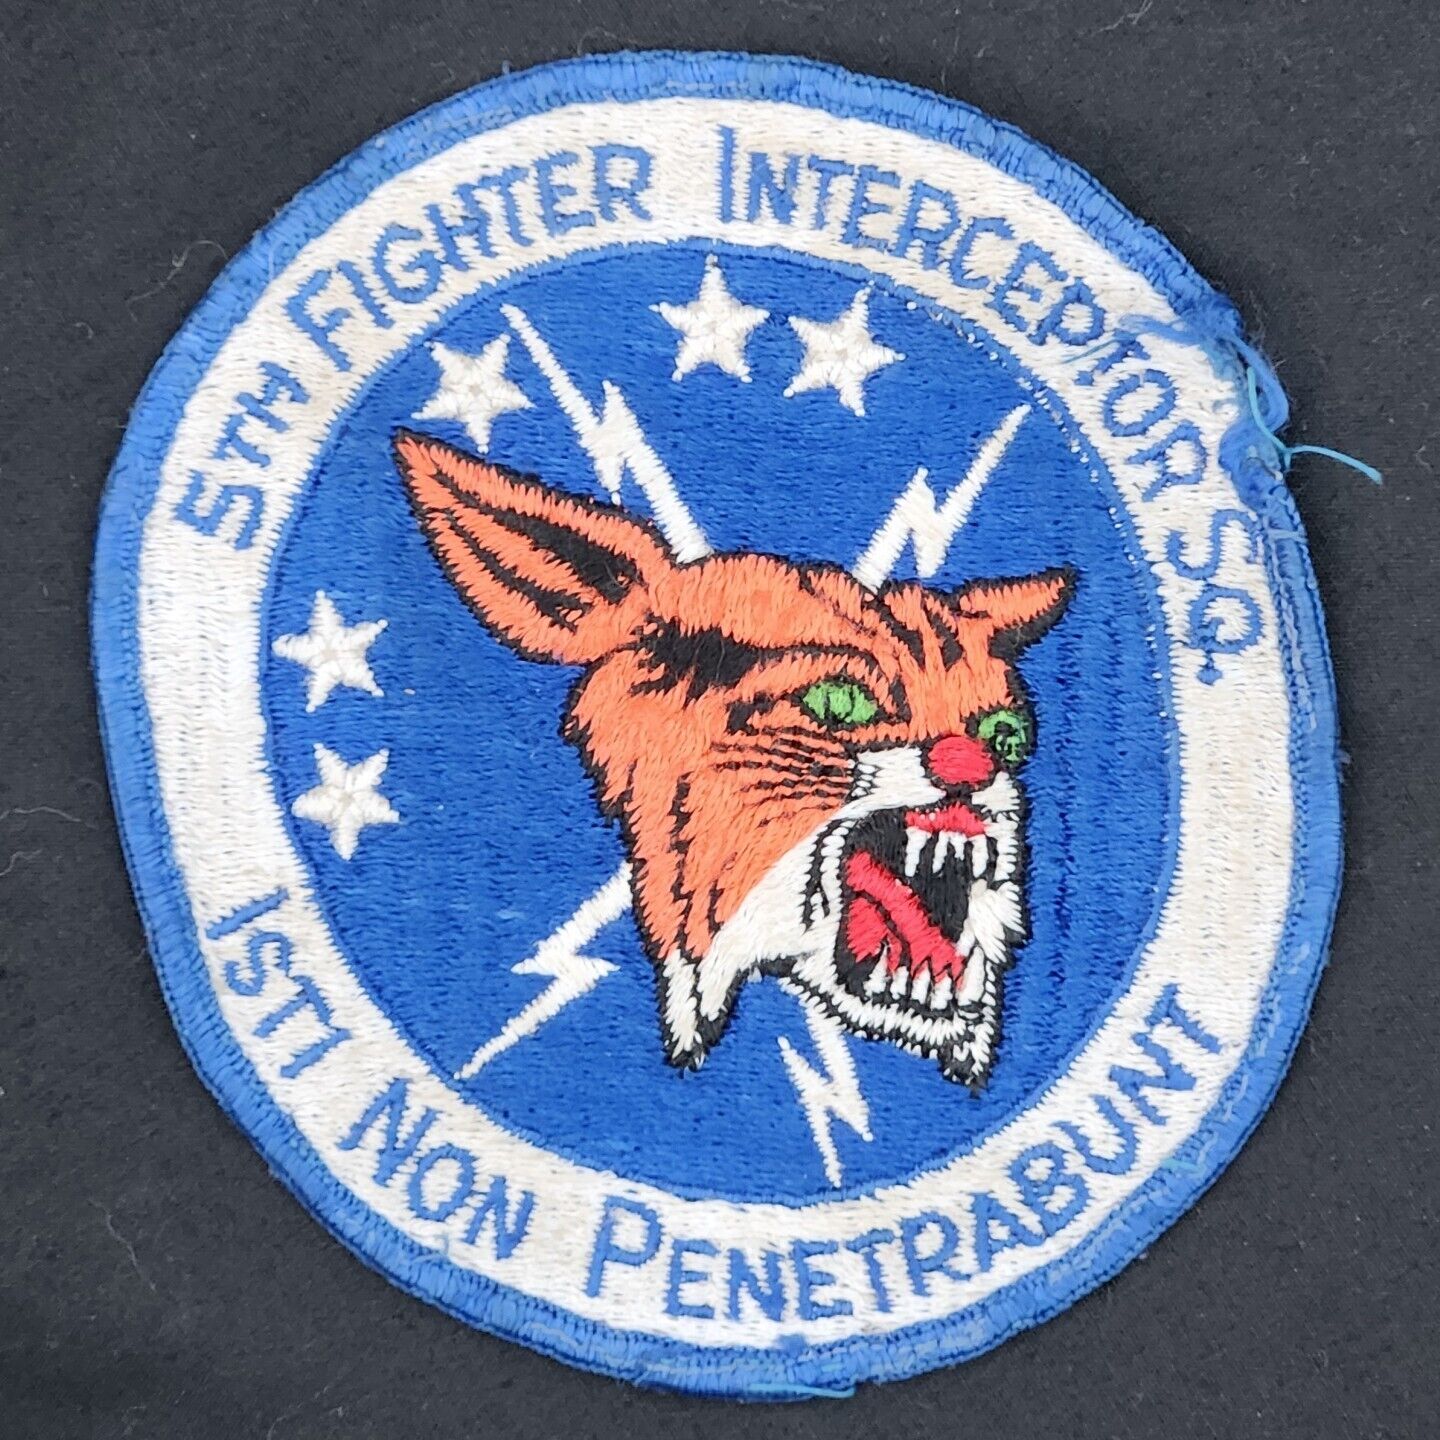 1961 Rare 5TH Fighter Interceptor SQ. Patch, Minot AFB, ND. 